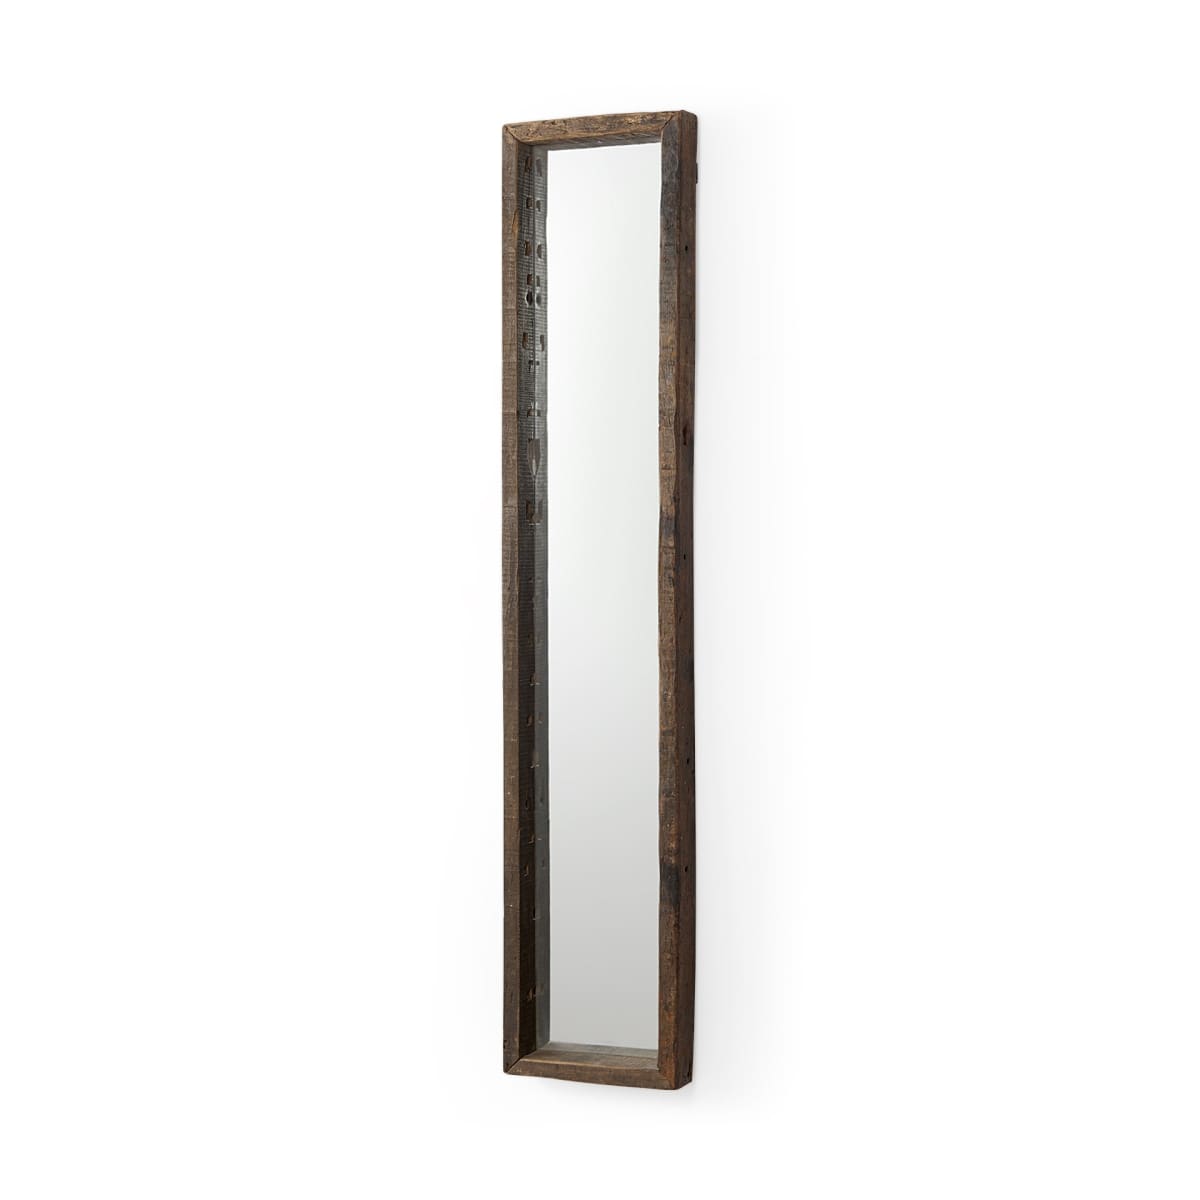 Gervaise Wall Mirror Brown Wood | 12L x 2W x 59H - wall-mirrors-grouped